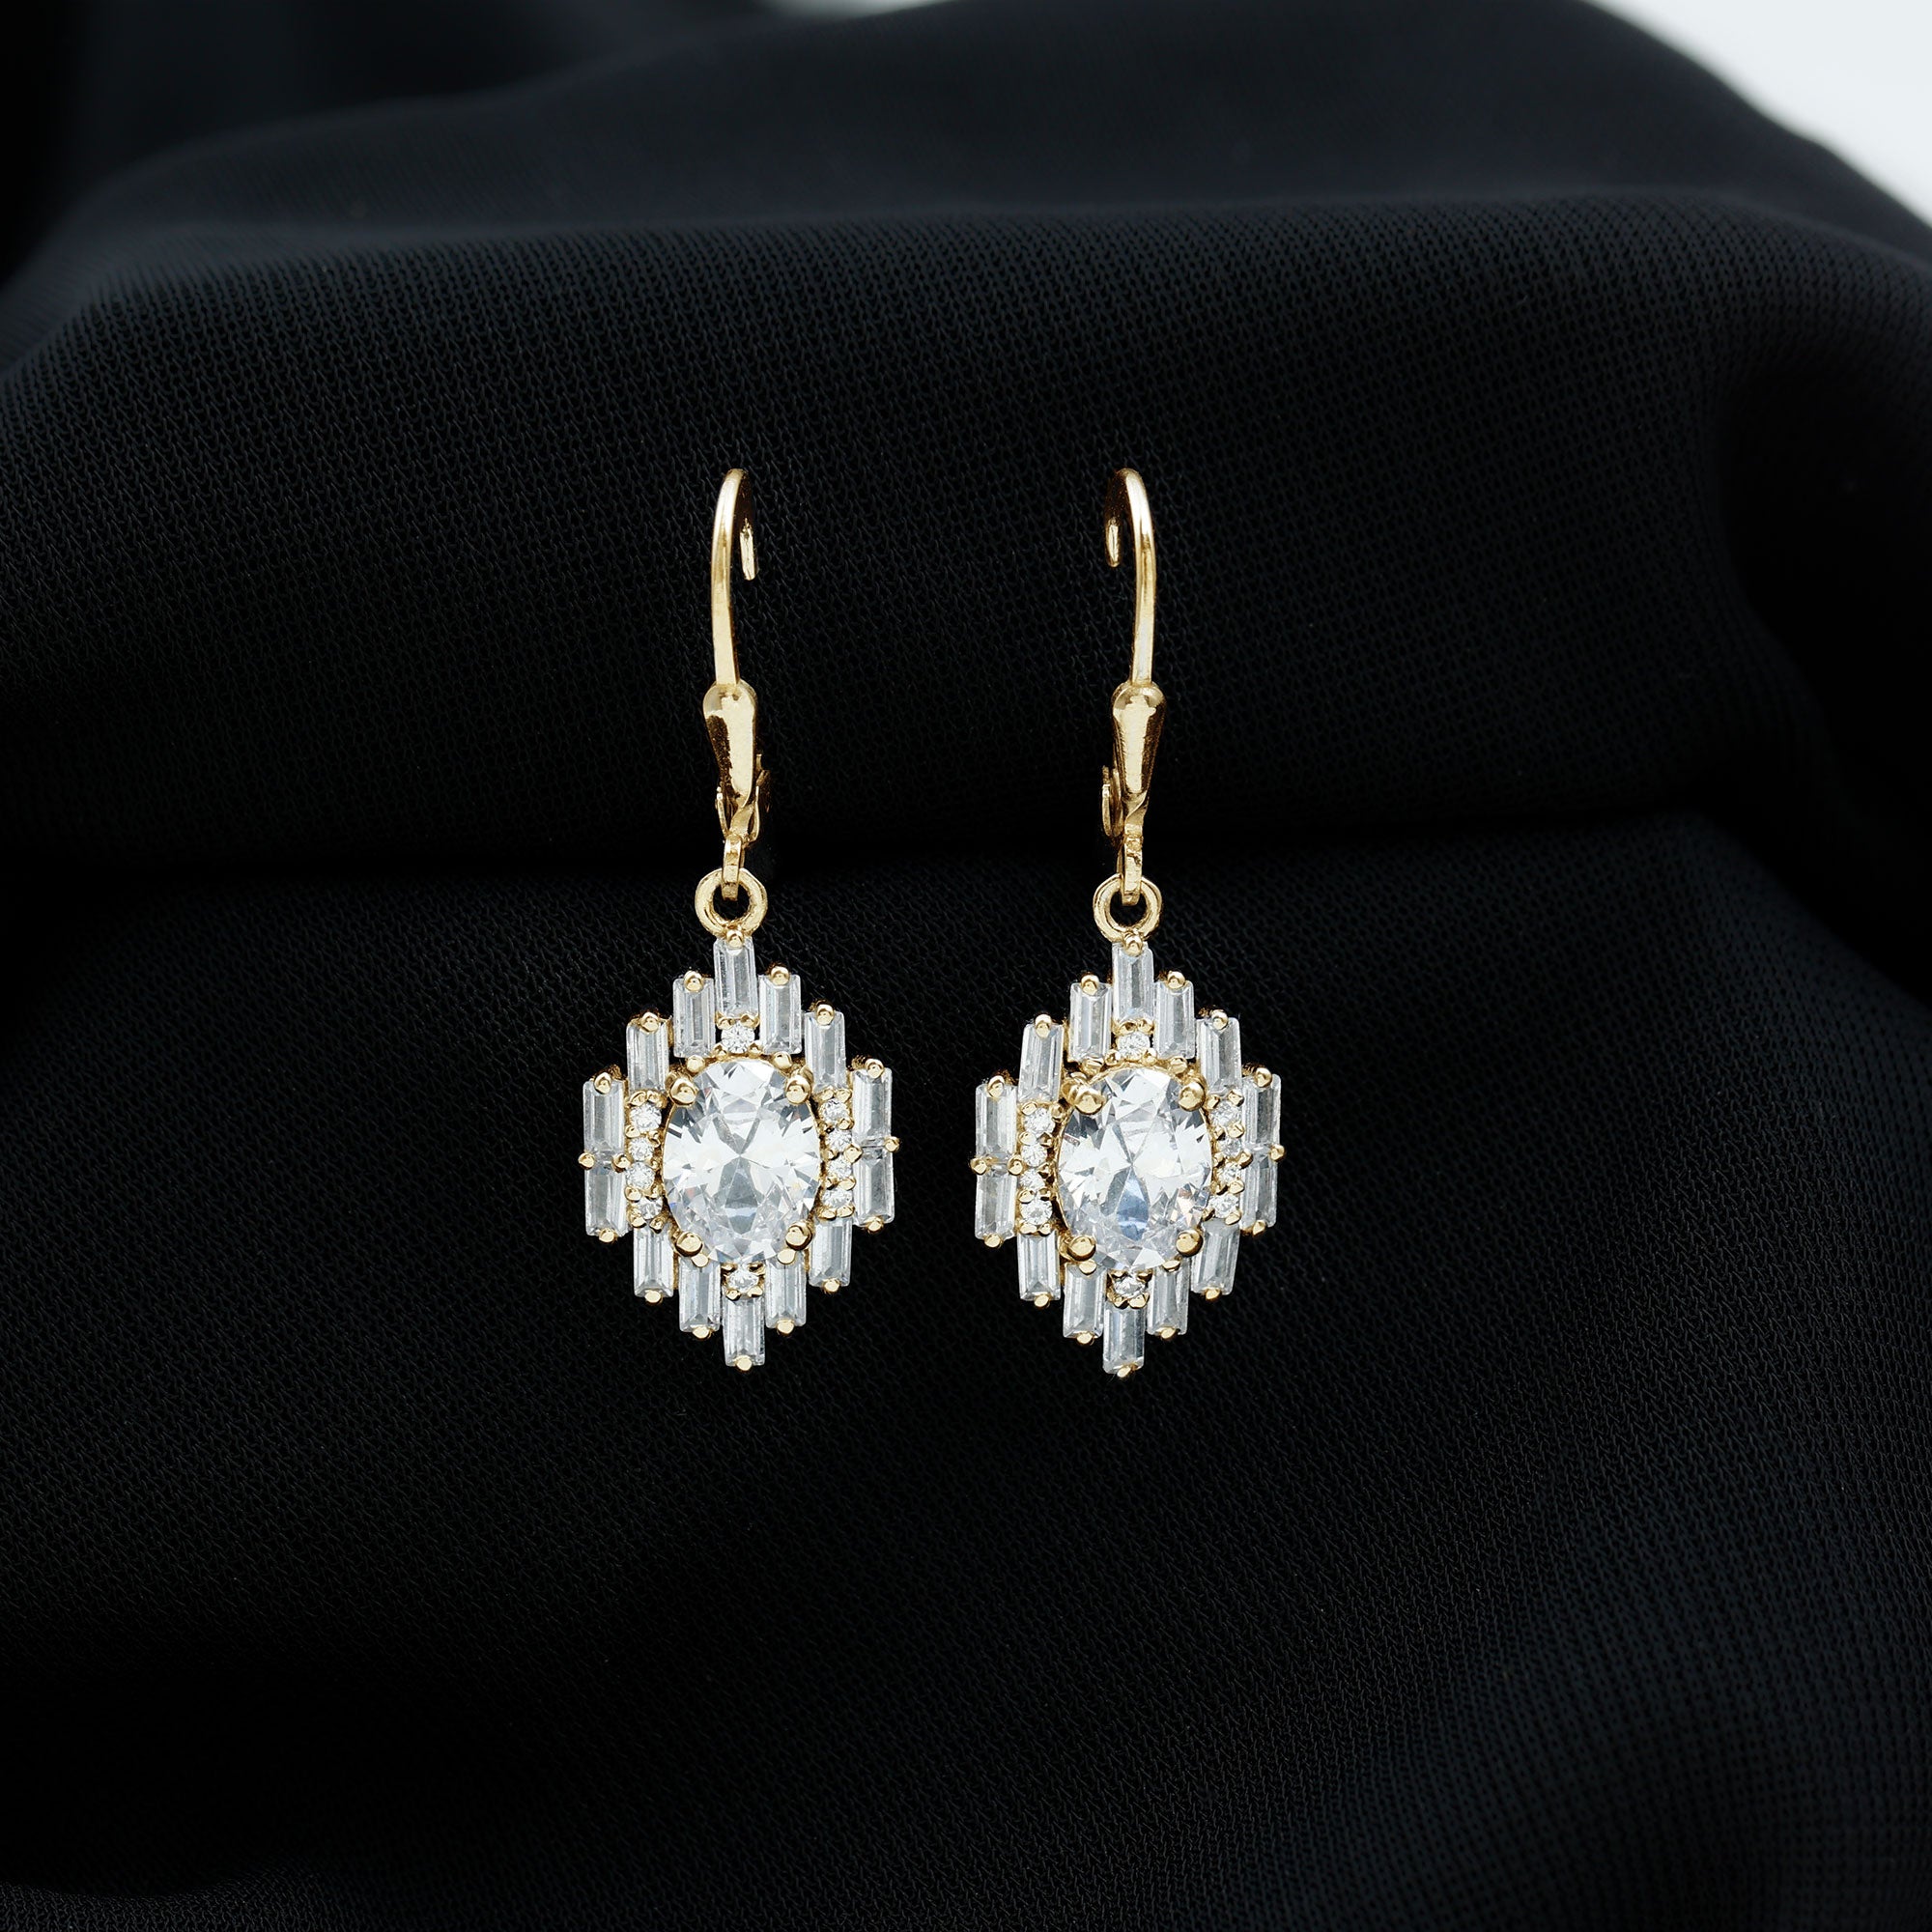 Sparkanite Jewels-Cluster Moissanite Drop Earrings with Lever Back Closure